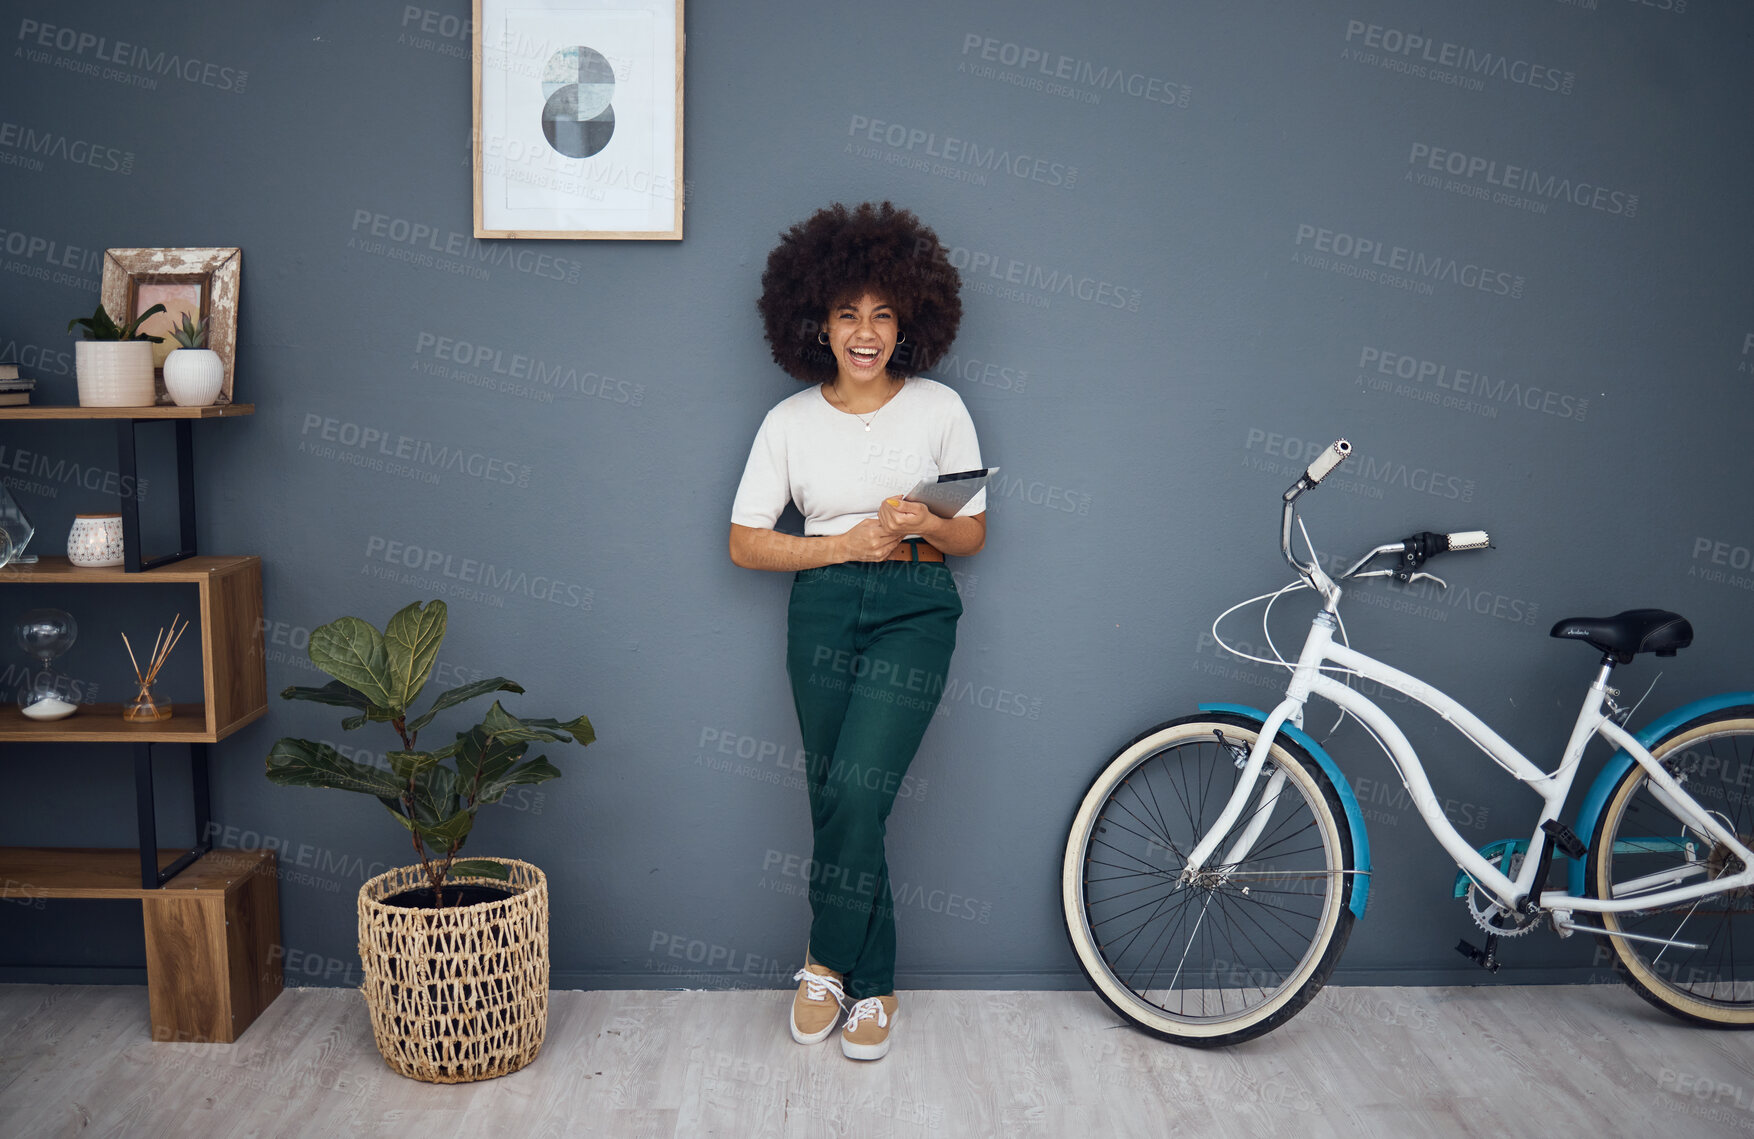 Buy stock photo Tablet, bicycle and portrait of black woman in home web or internet browsing. Smile, relax and happy female from South Africa on digital touchscreen tech, mobile app or networking on social media.